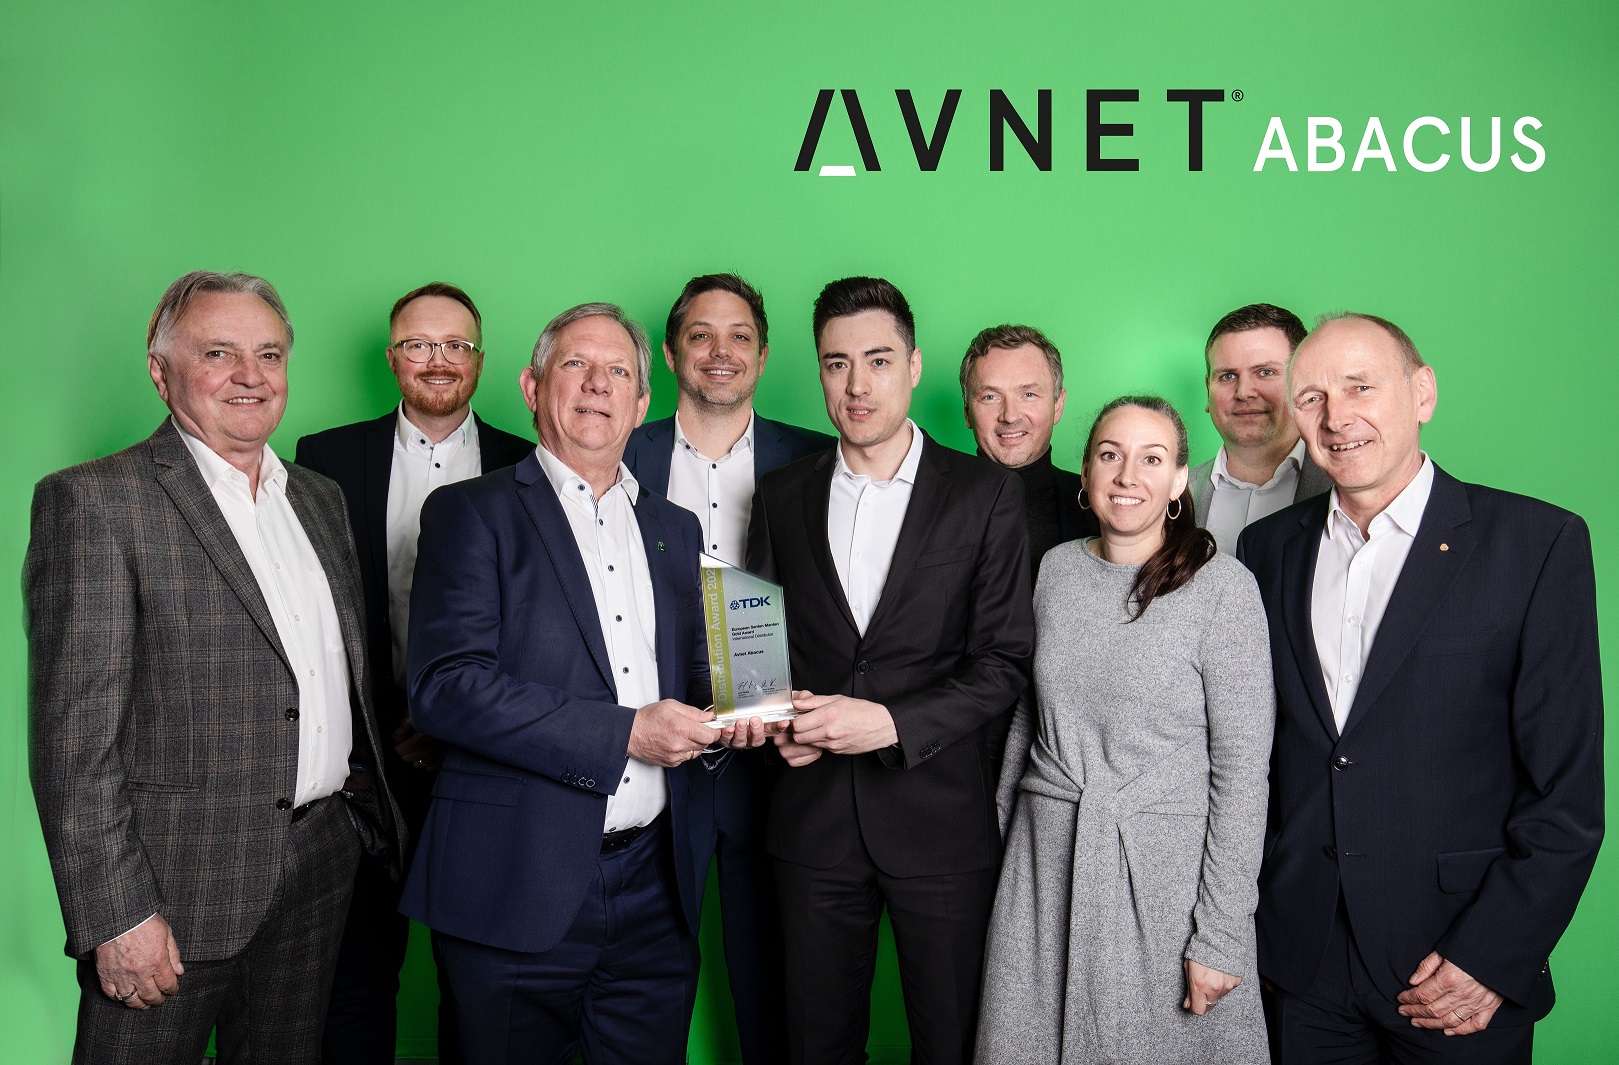 Avnet Abacus secures TDK European distribution award for second year in a row